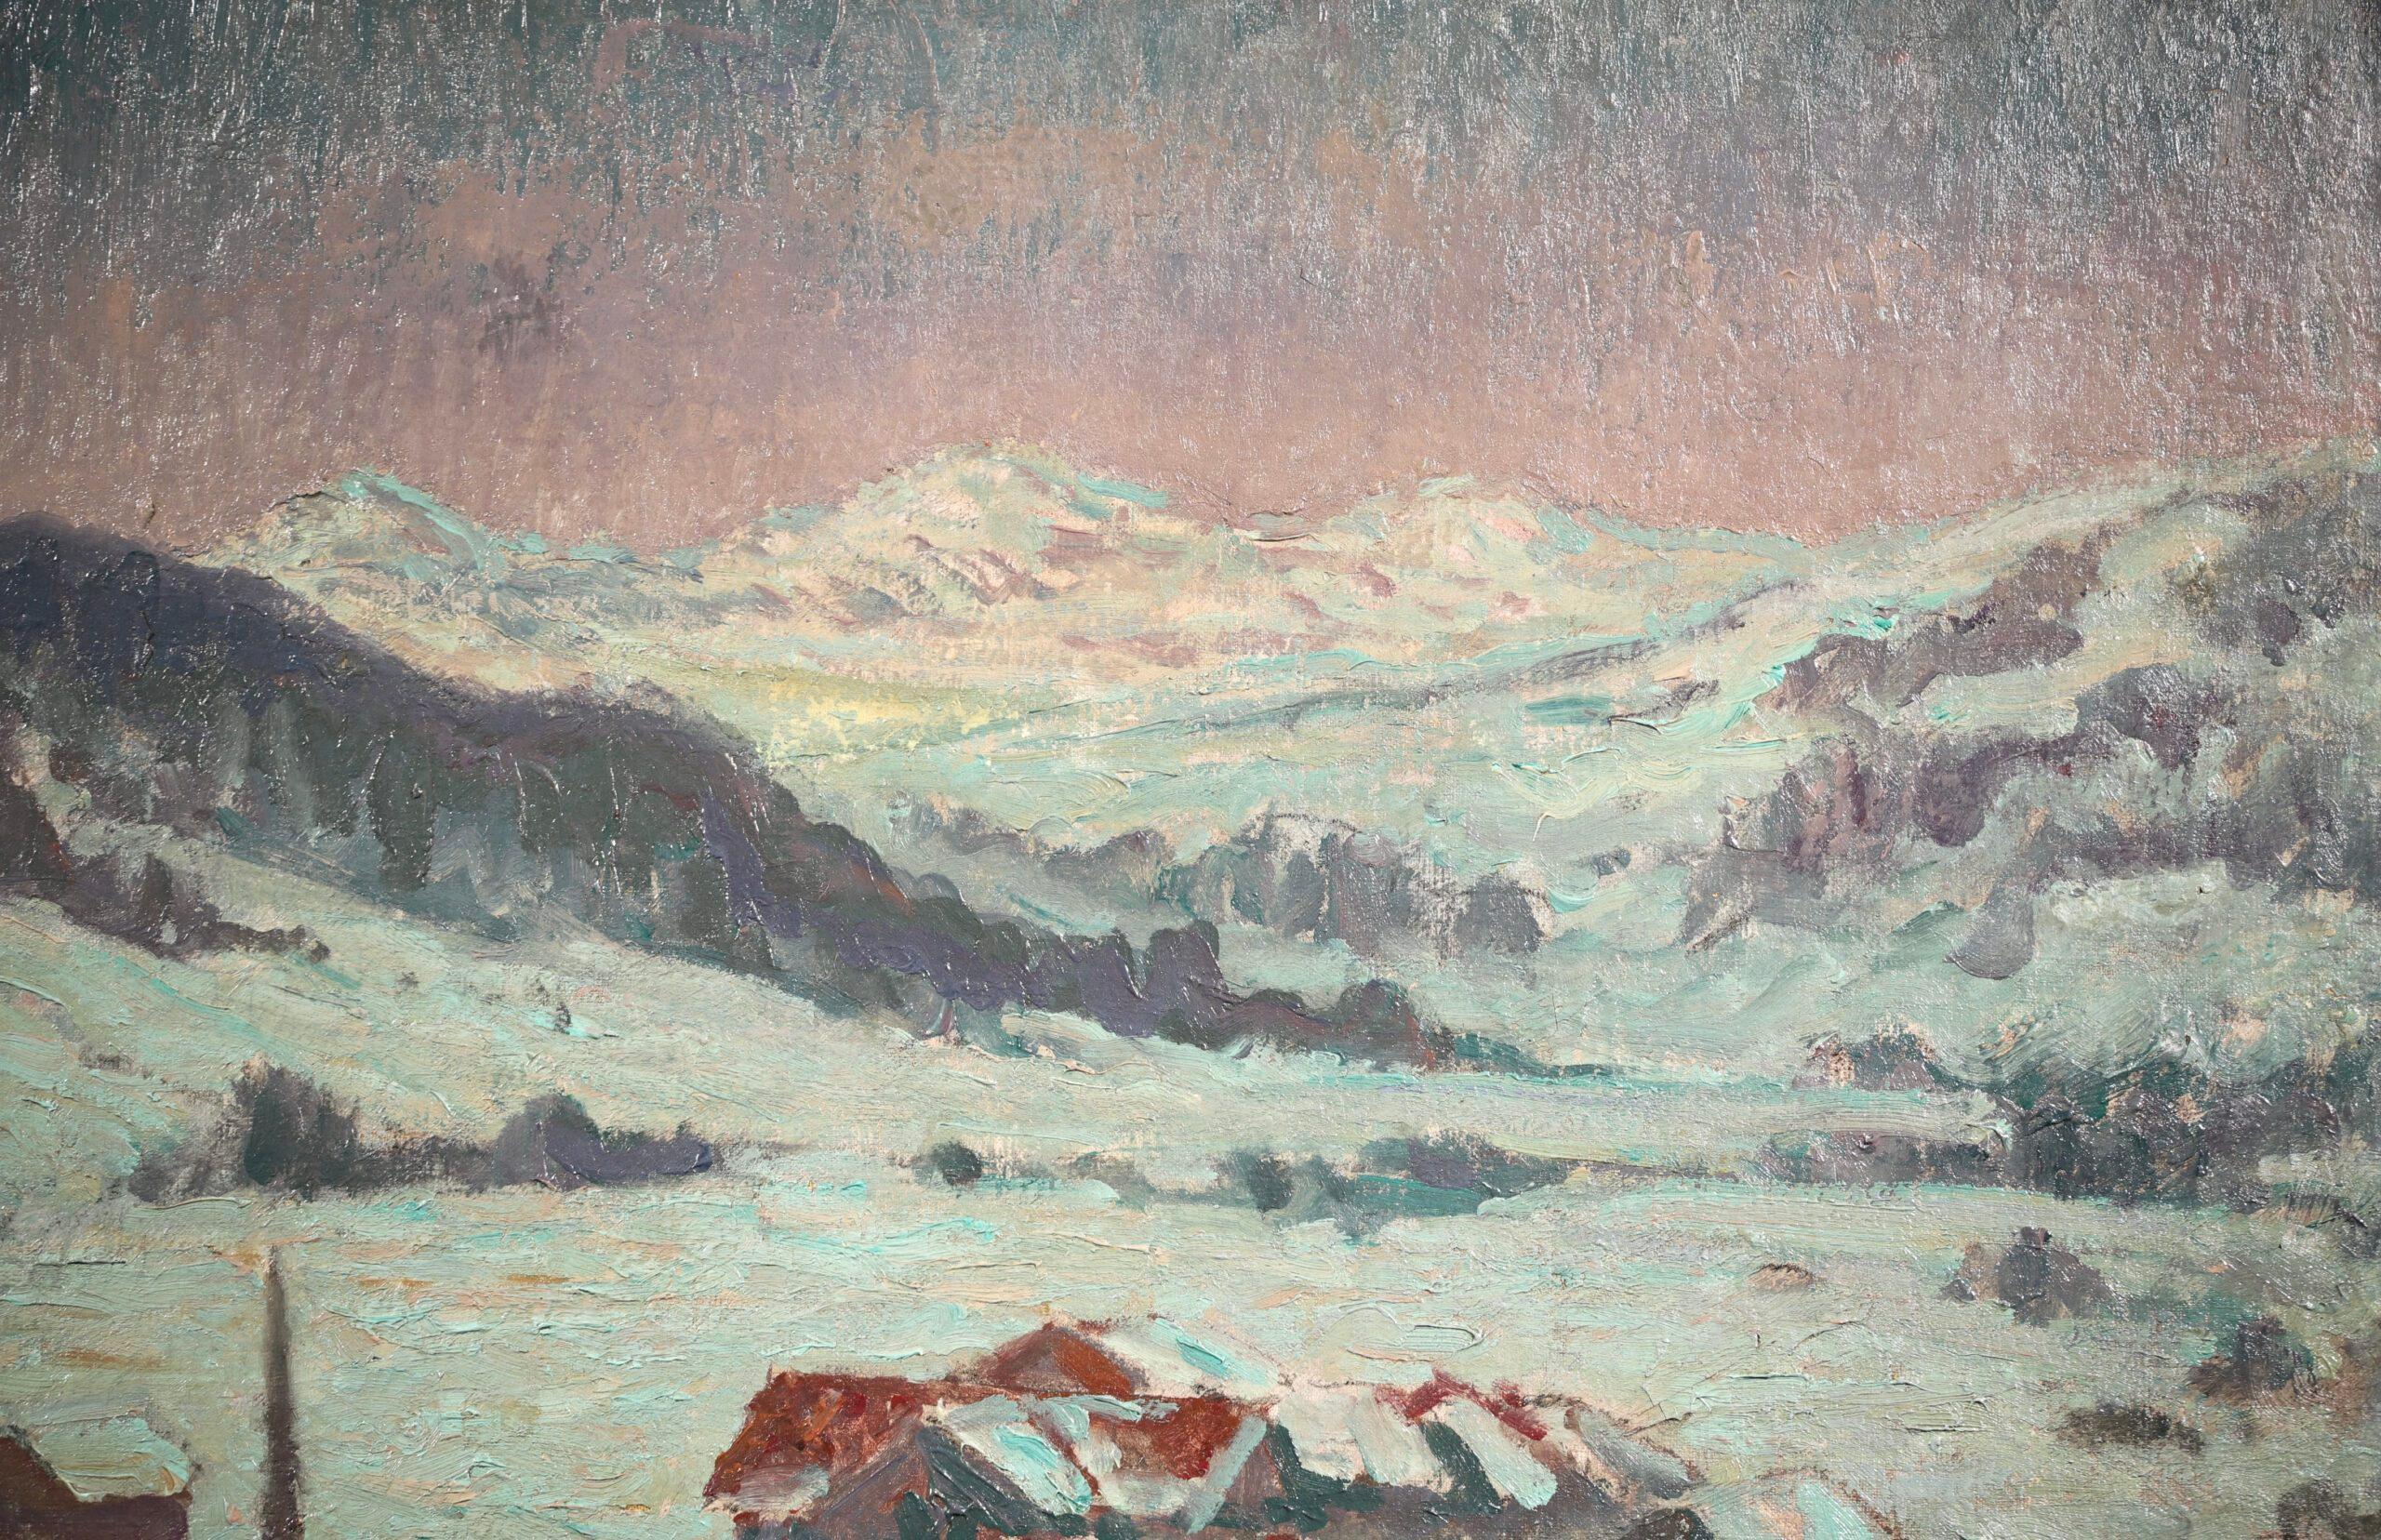 Winter Snow - Gstaad - Impressionist Landscape Oil by William Samuel Horton For Sale 1